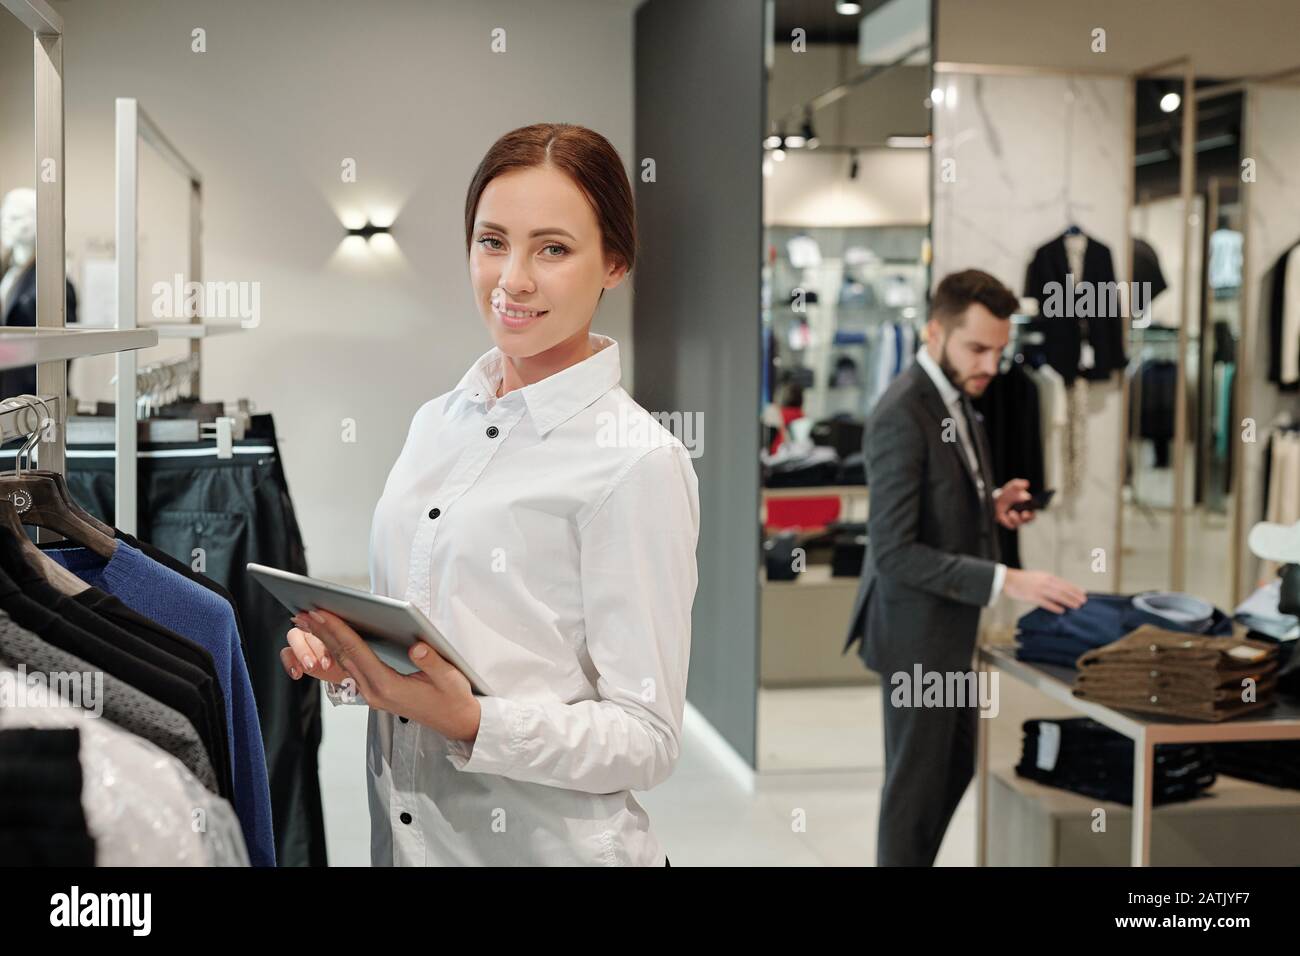 Portrait of smiling beautiful young saleswoman in shirt standing at rack and checking receiving merchandise in clothes shop Stock Photo